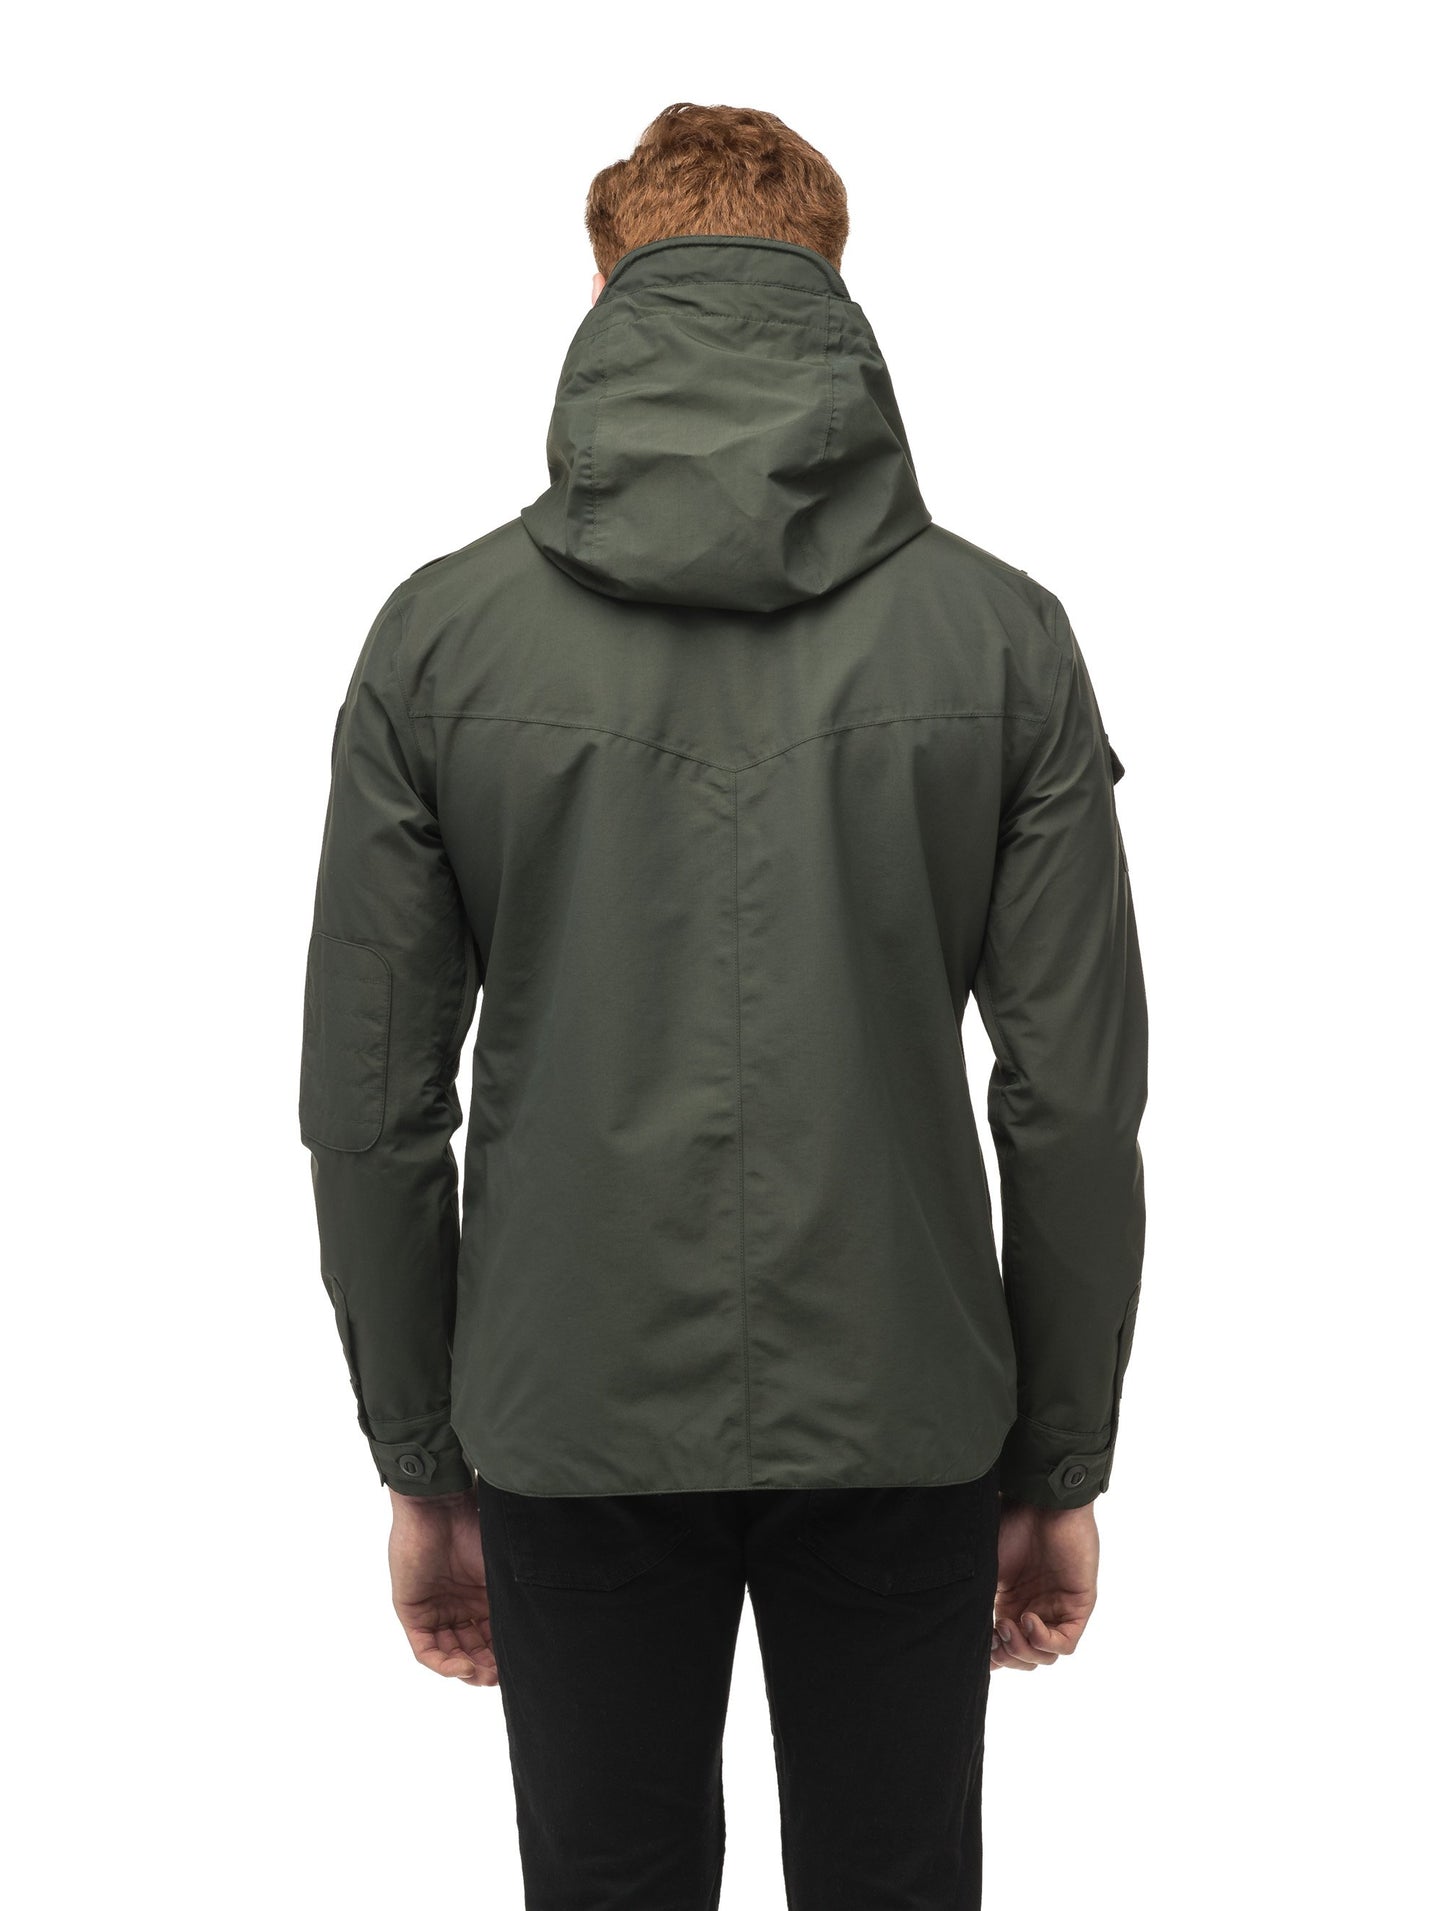 Men's hooded shirt jacket with patch chest pockets in Dark Forest